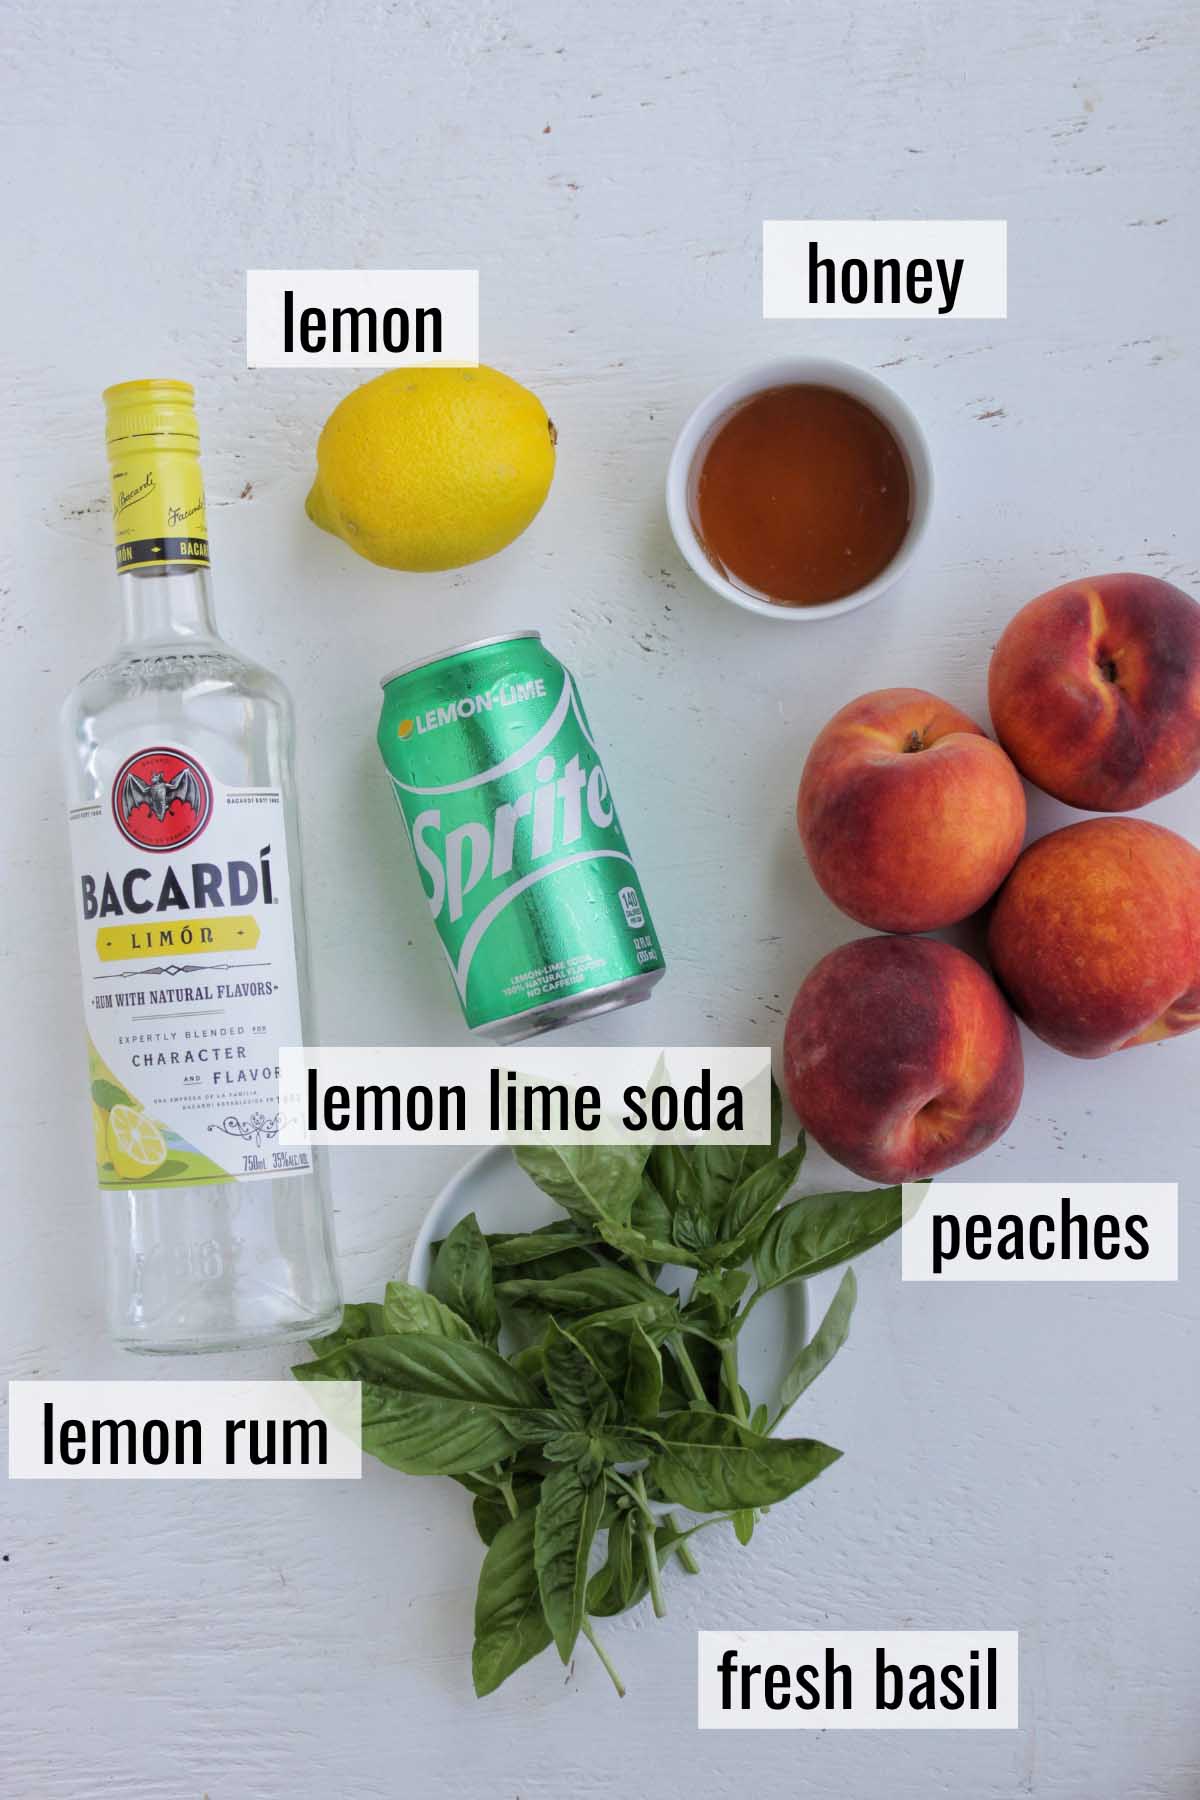 peach and lemon rum cocktail ingredients with labels.